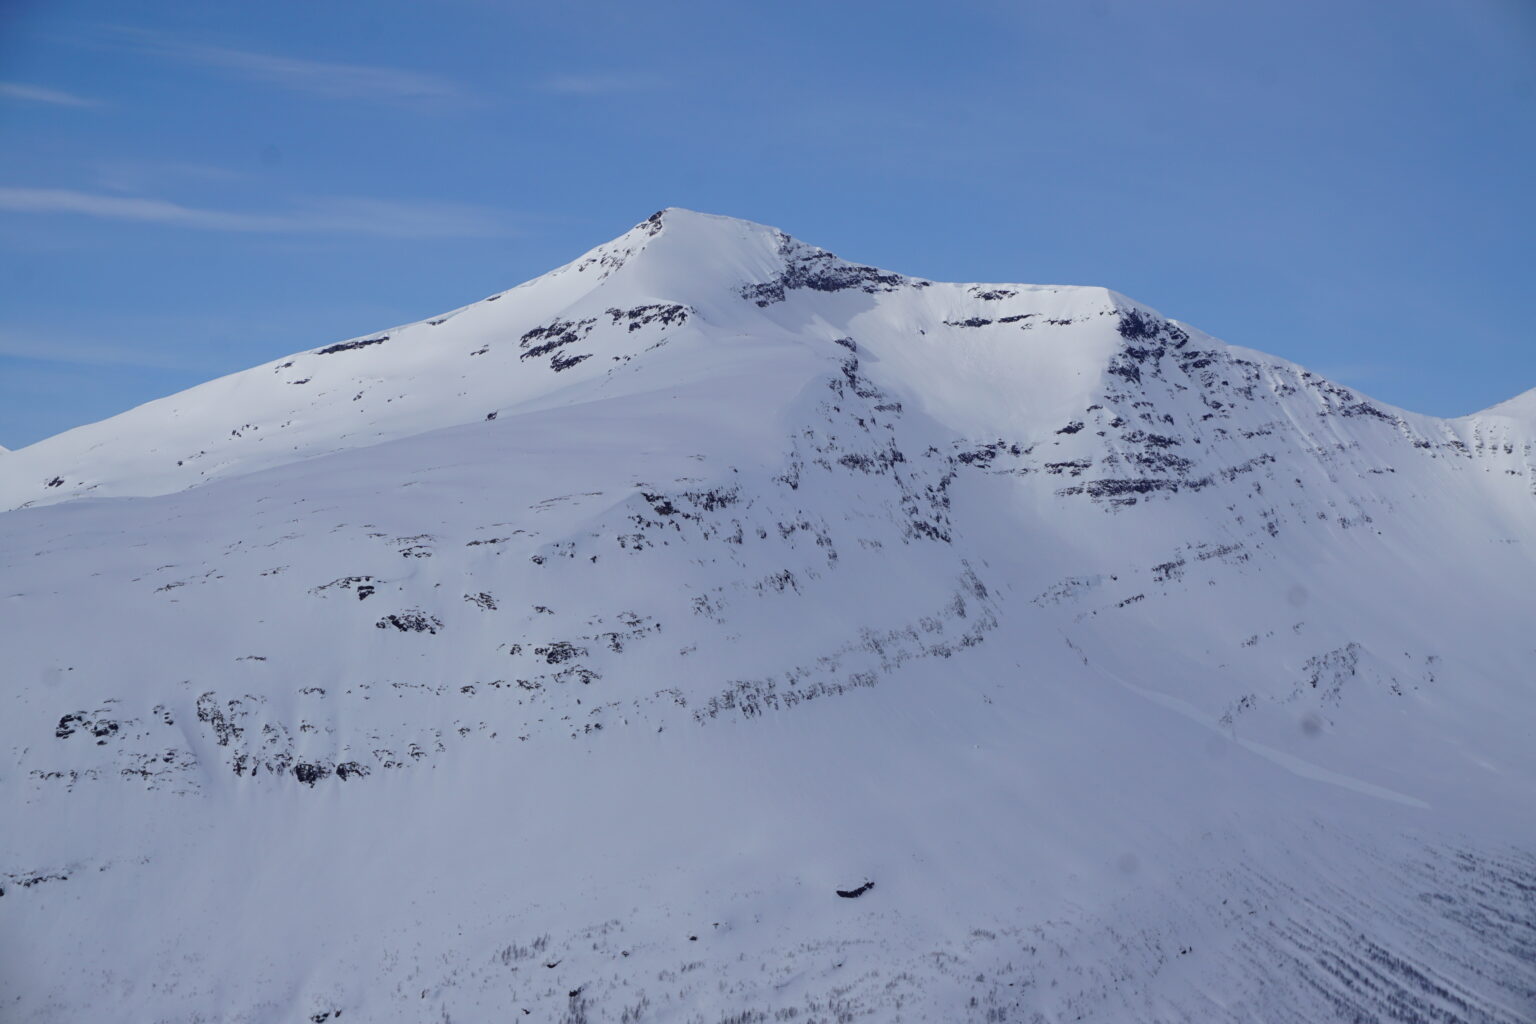 Looking at the Blåbærfjellet Northeast bowl from the south